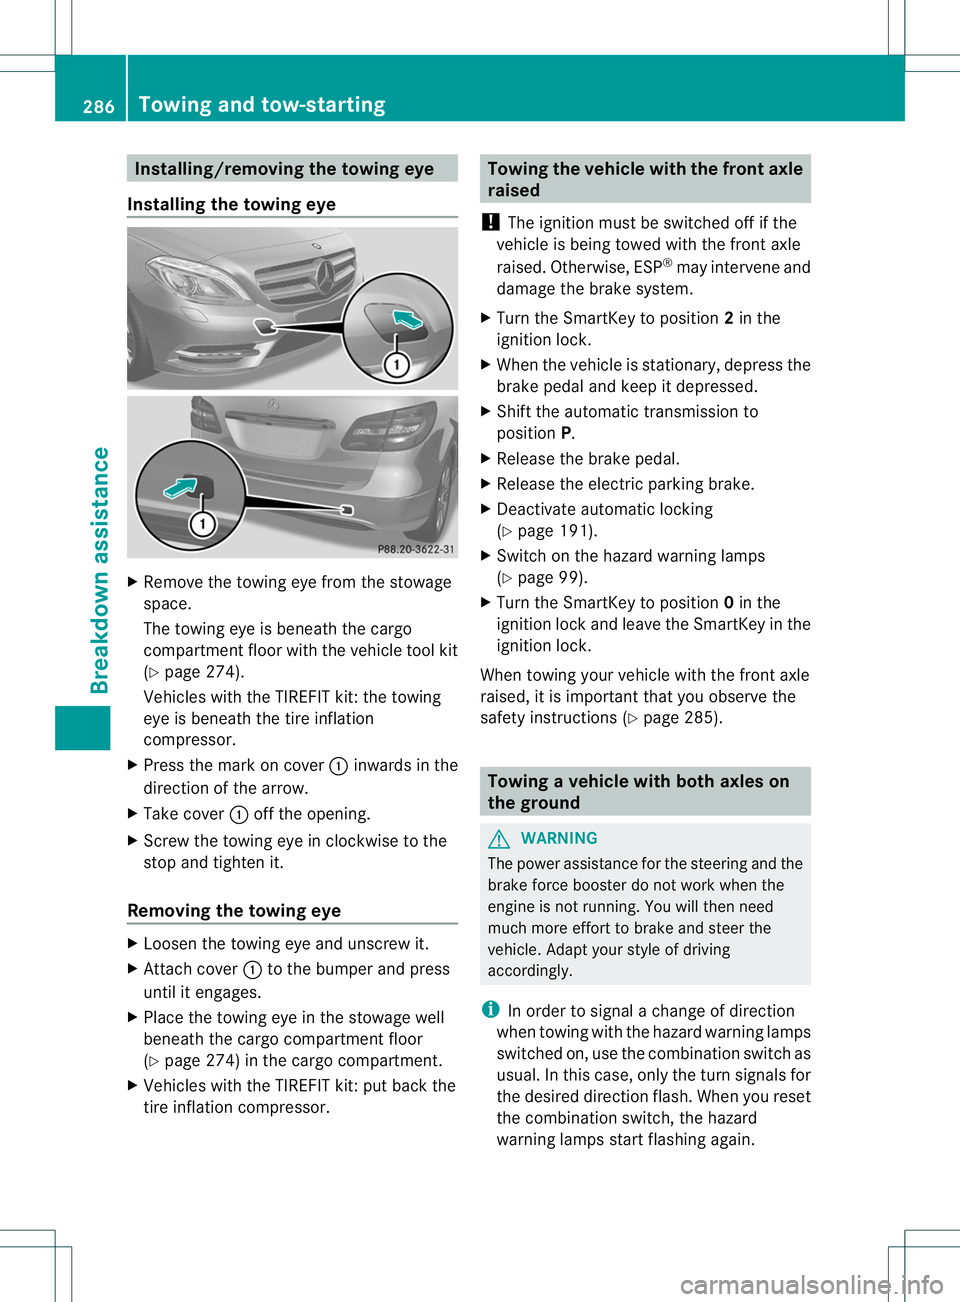 MERCEDES-BENZ B-CLASS SPORTS 2013 Owners Guide Installing/removing the towing eye
Installing the towing eye X
Remove the towing eye from the stowage
space.
The towing eye is beneath the cargo
compartmen tfloor with the vehicle tool kit
(Y page 274